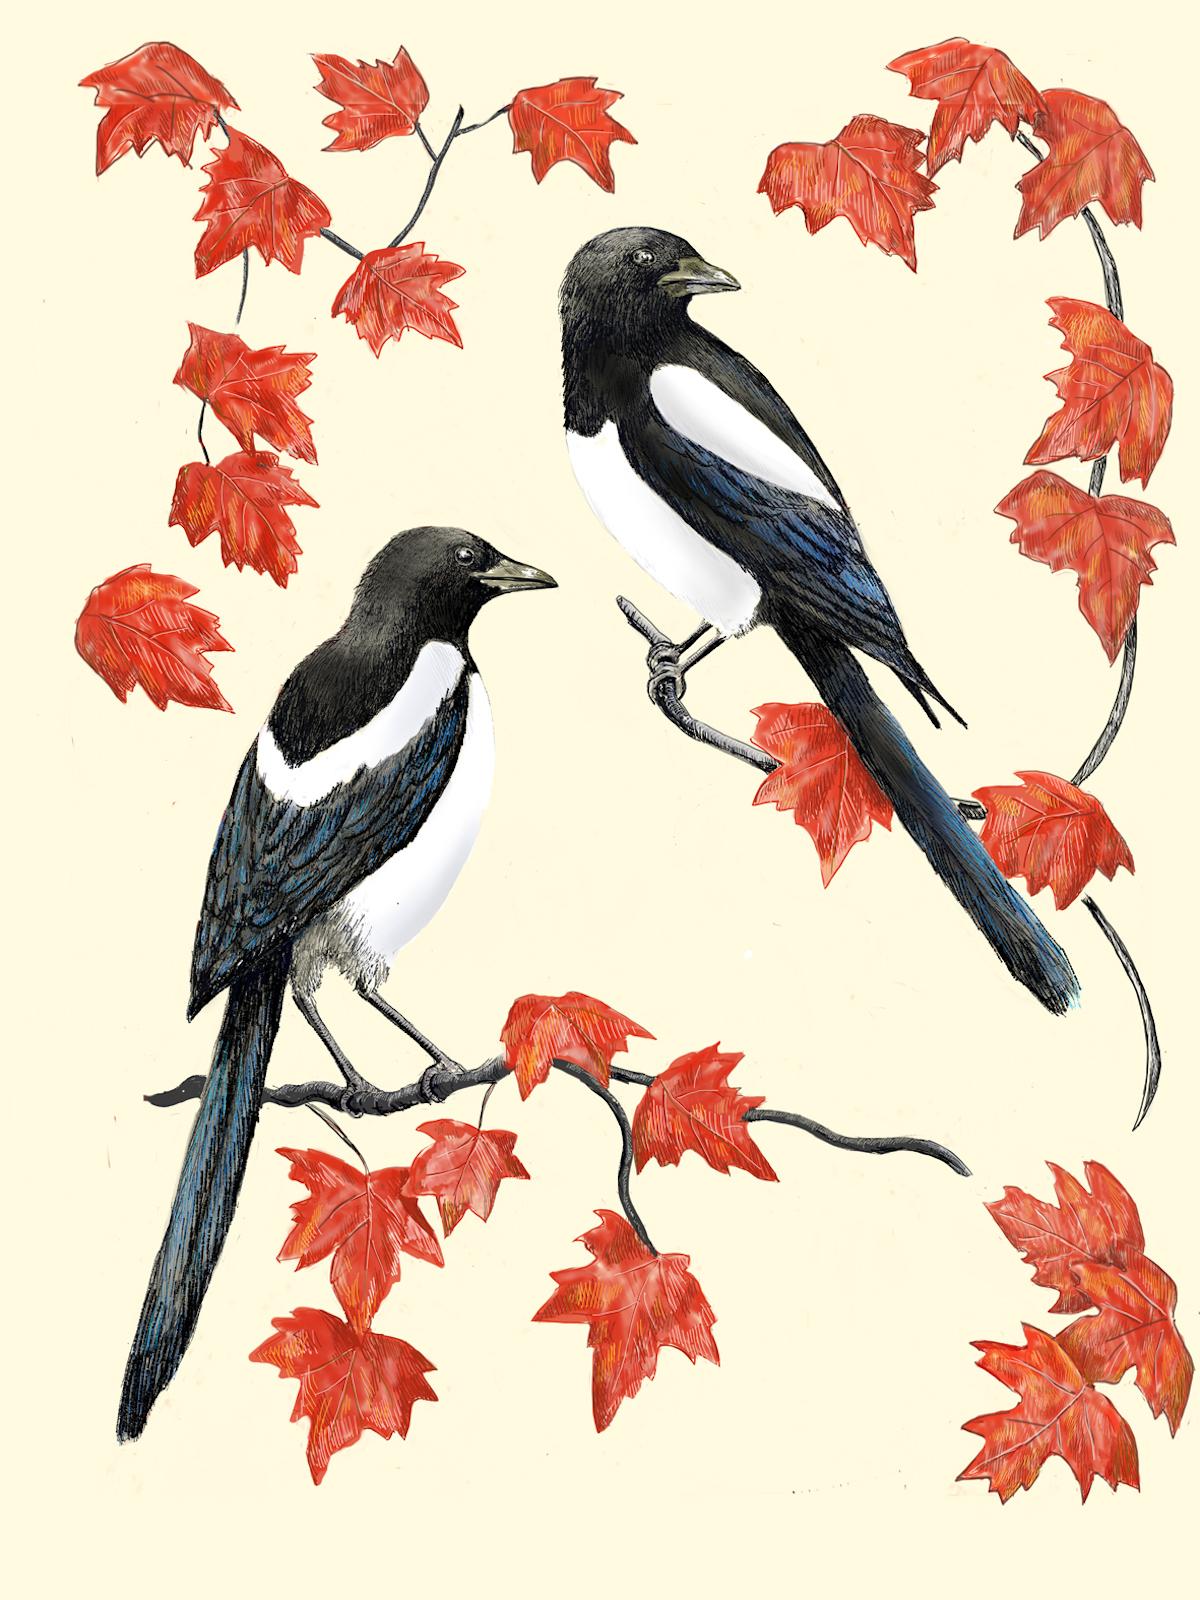 Jane Peart  Animal Print - Two More for Joy, Art print, Contemporary, Magpies, Animal art, Birds, Leaf art